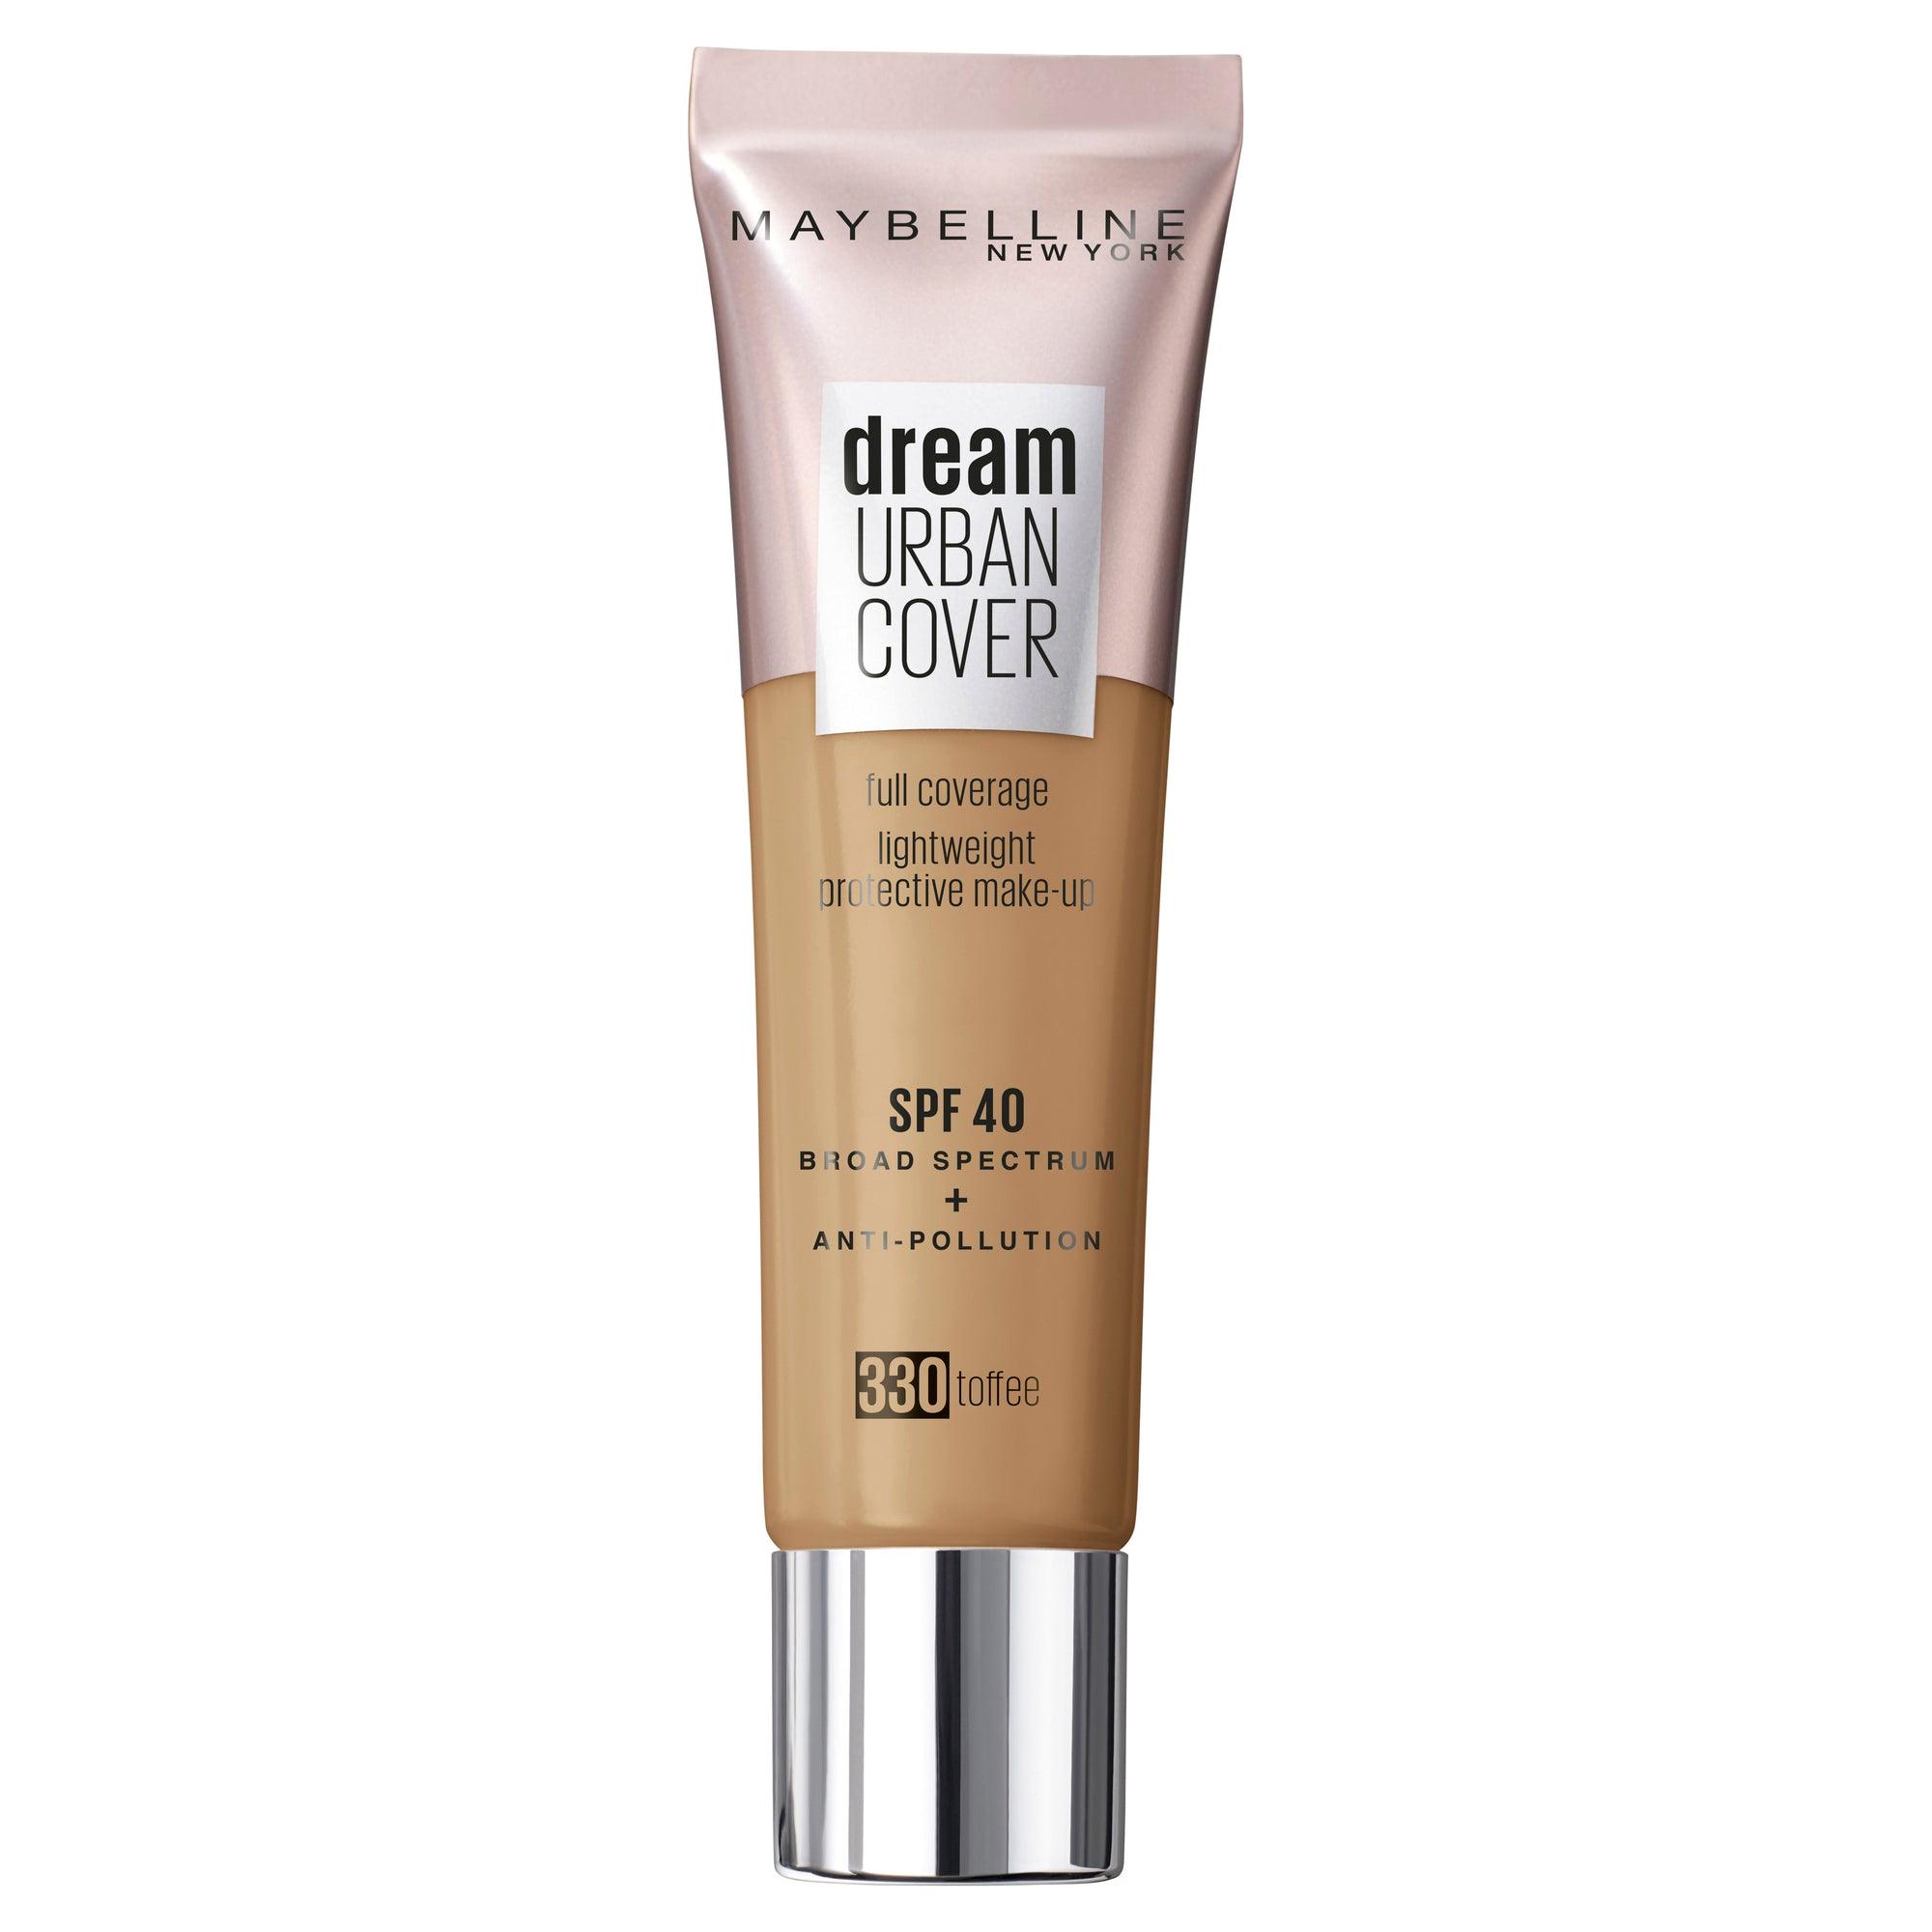 Maybelline Dream Urban Cover SPF 40 Full Coverage Foundation - 330 Toffee - www.indiancart.com.au - Foundations & Concealers - Maybelline - Maybelline